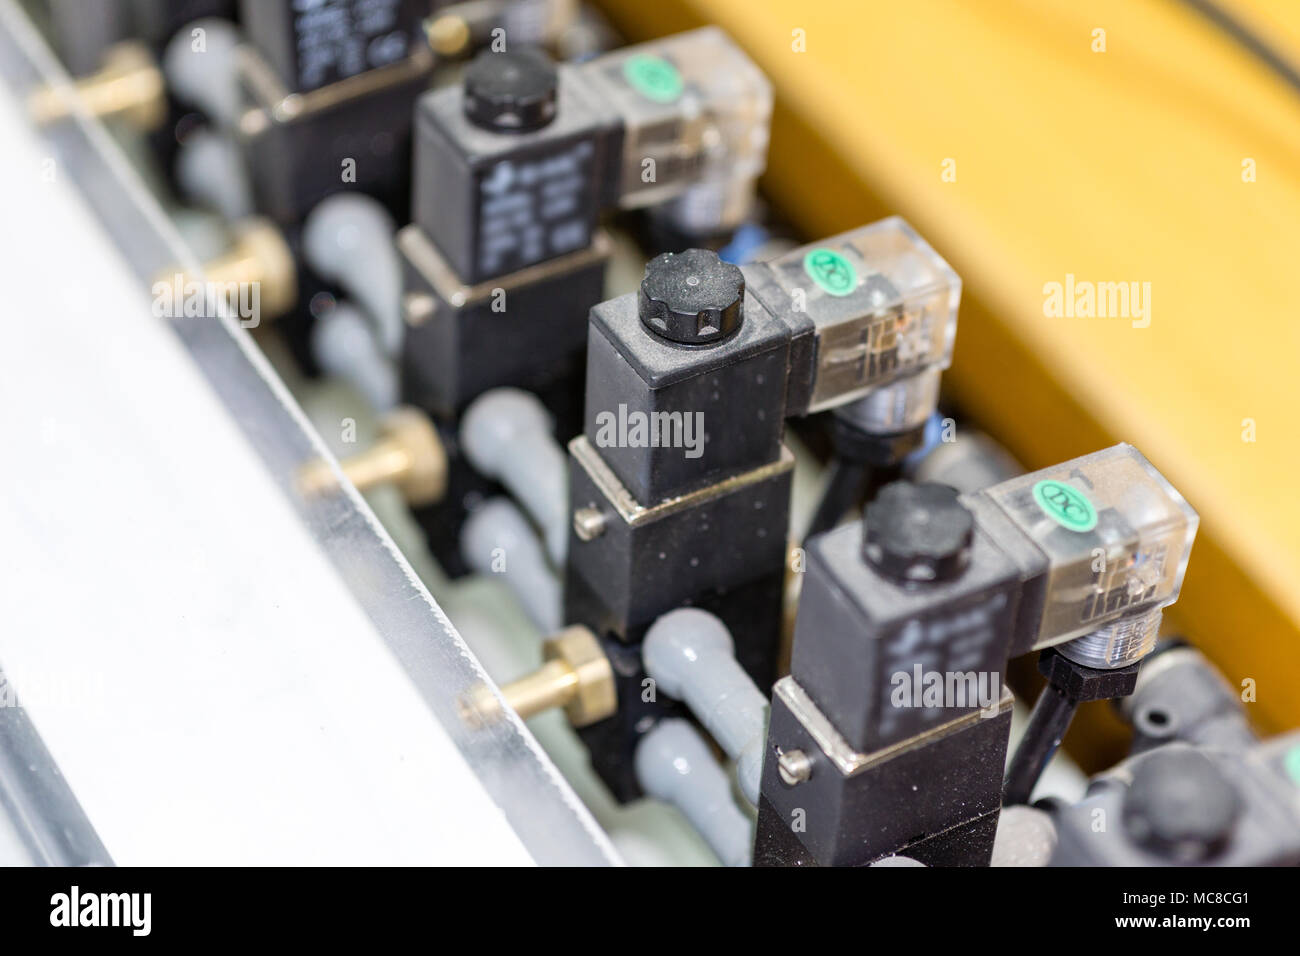 pneumatic components of industrial factory machinery installation close up Stock Photo